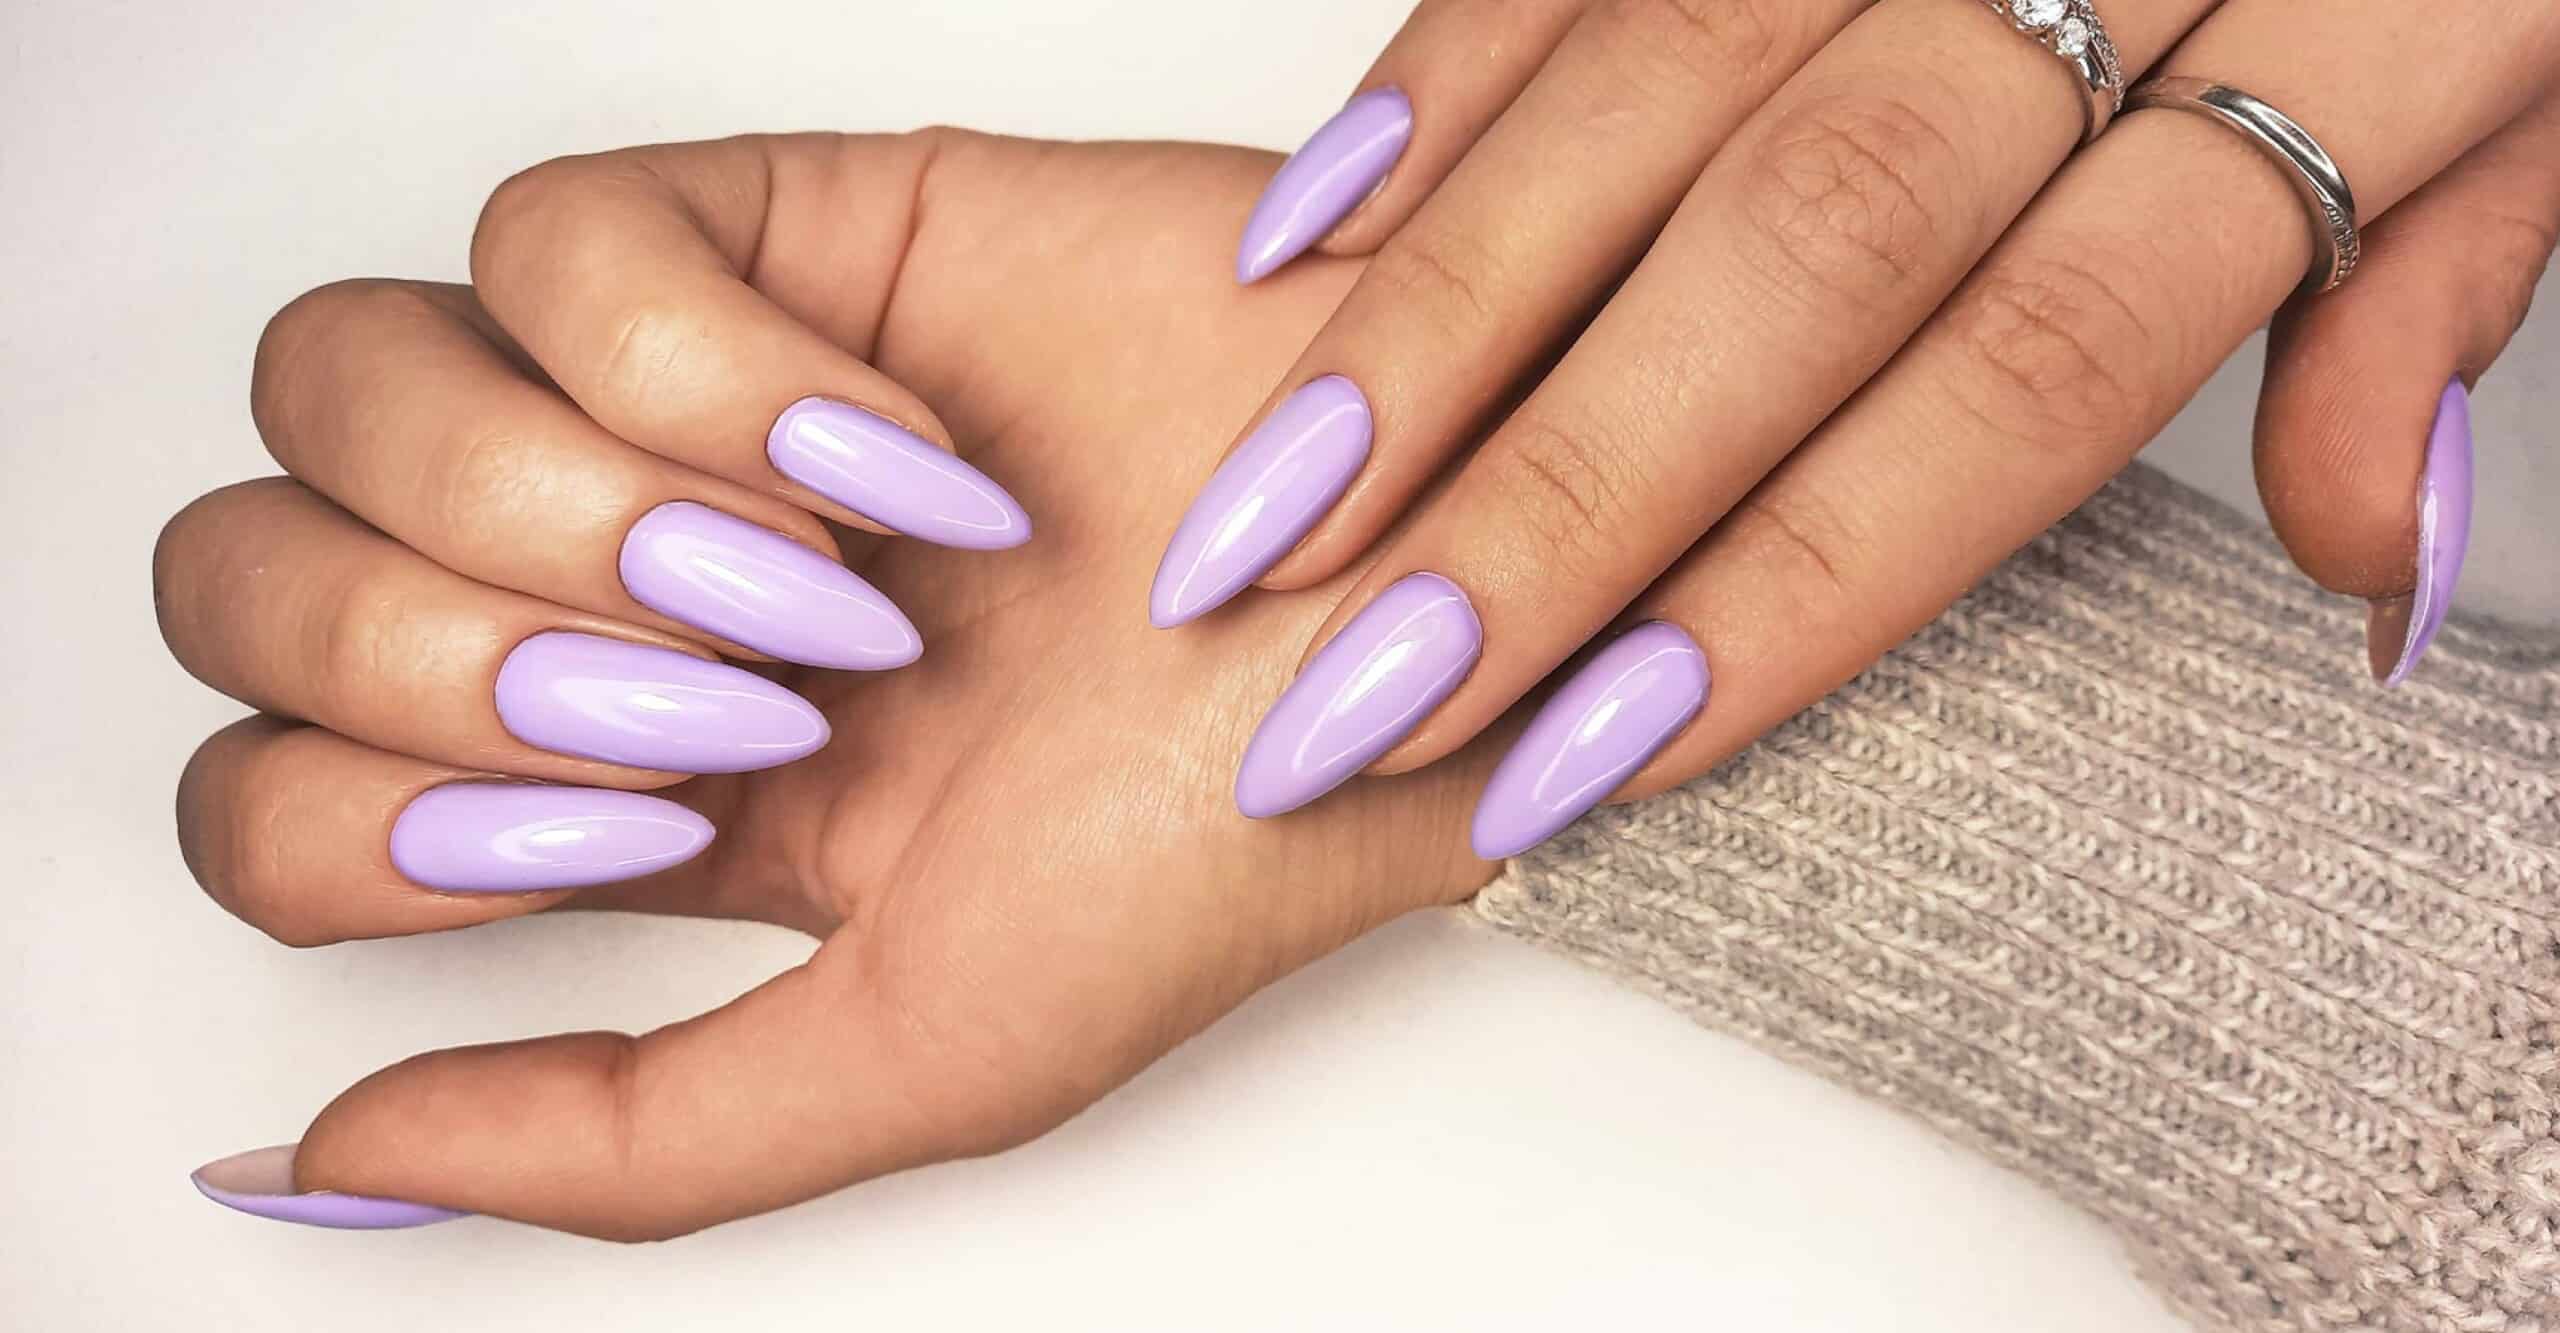 1000 Purple Acrylic Nails Stock Photos Pictures  RoyaltyFree Images   iStock